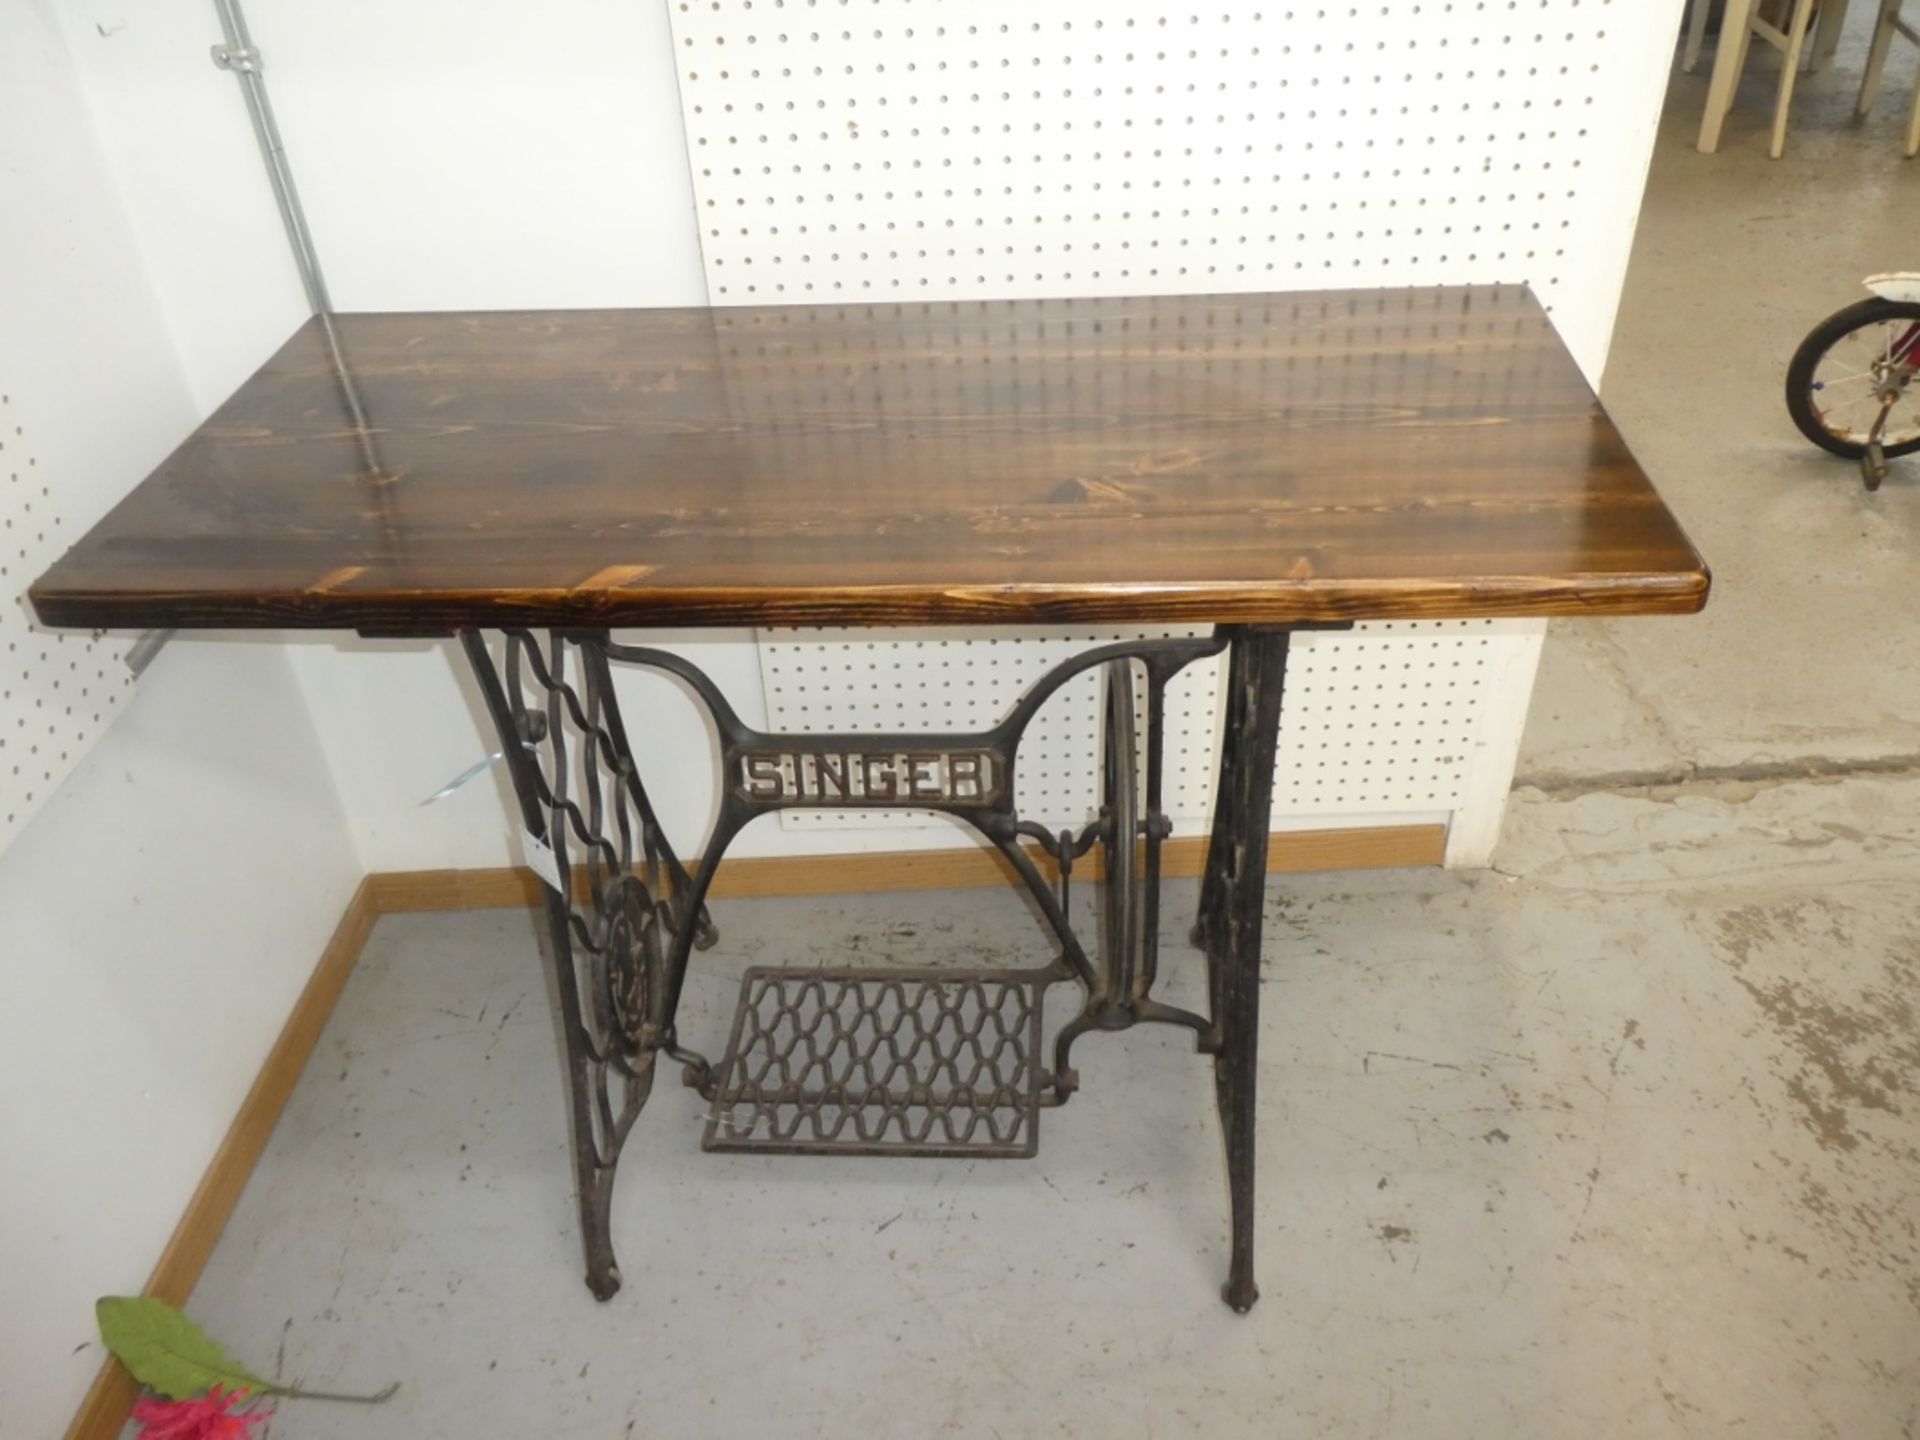 PINE TOP SEWING MACHINE TABLE 30"H 40.5"W 18"D